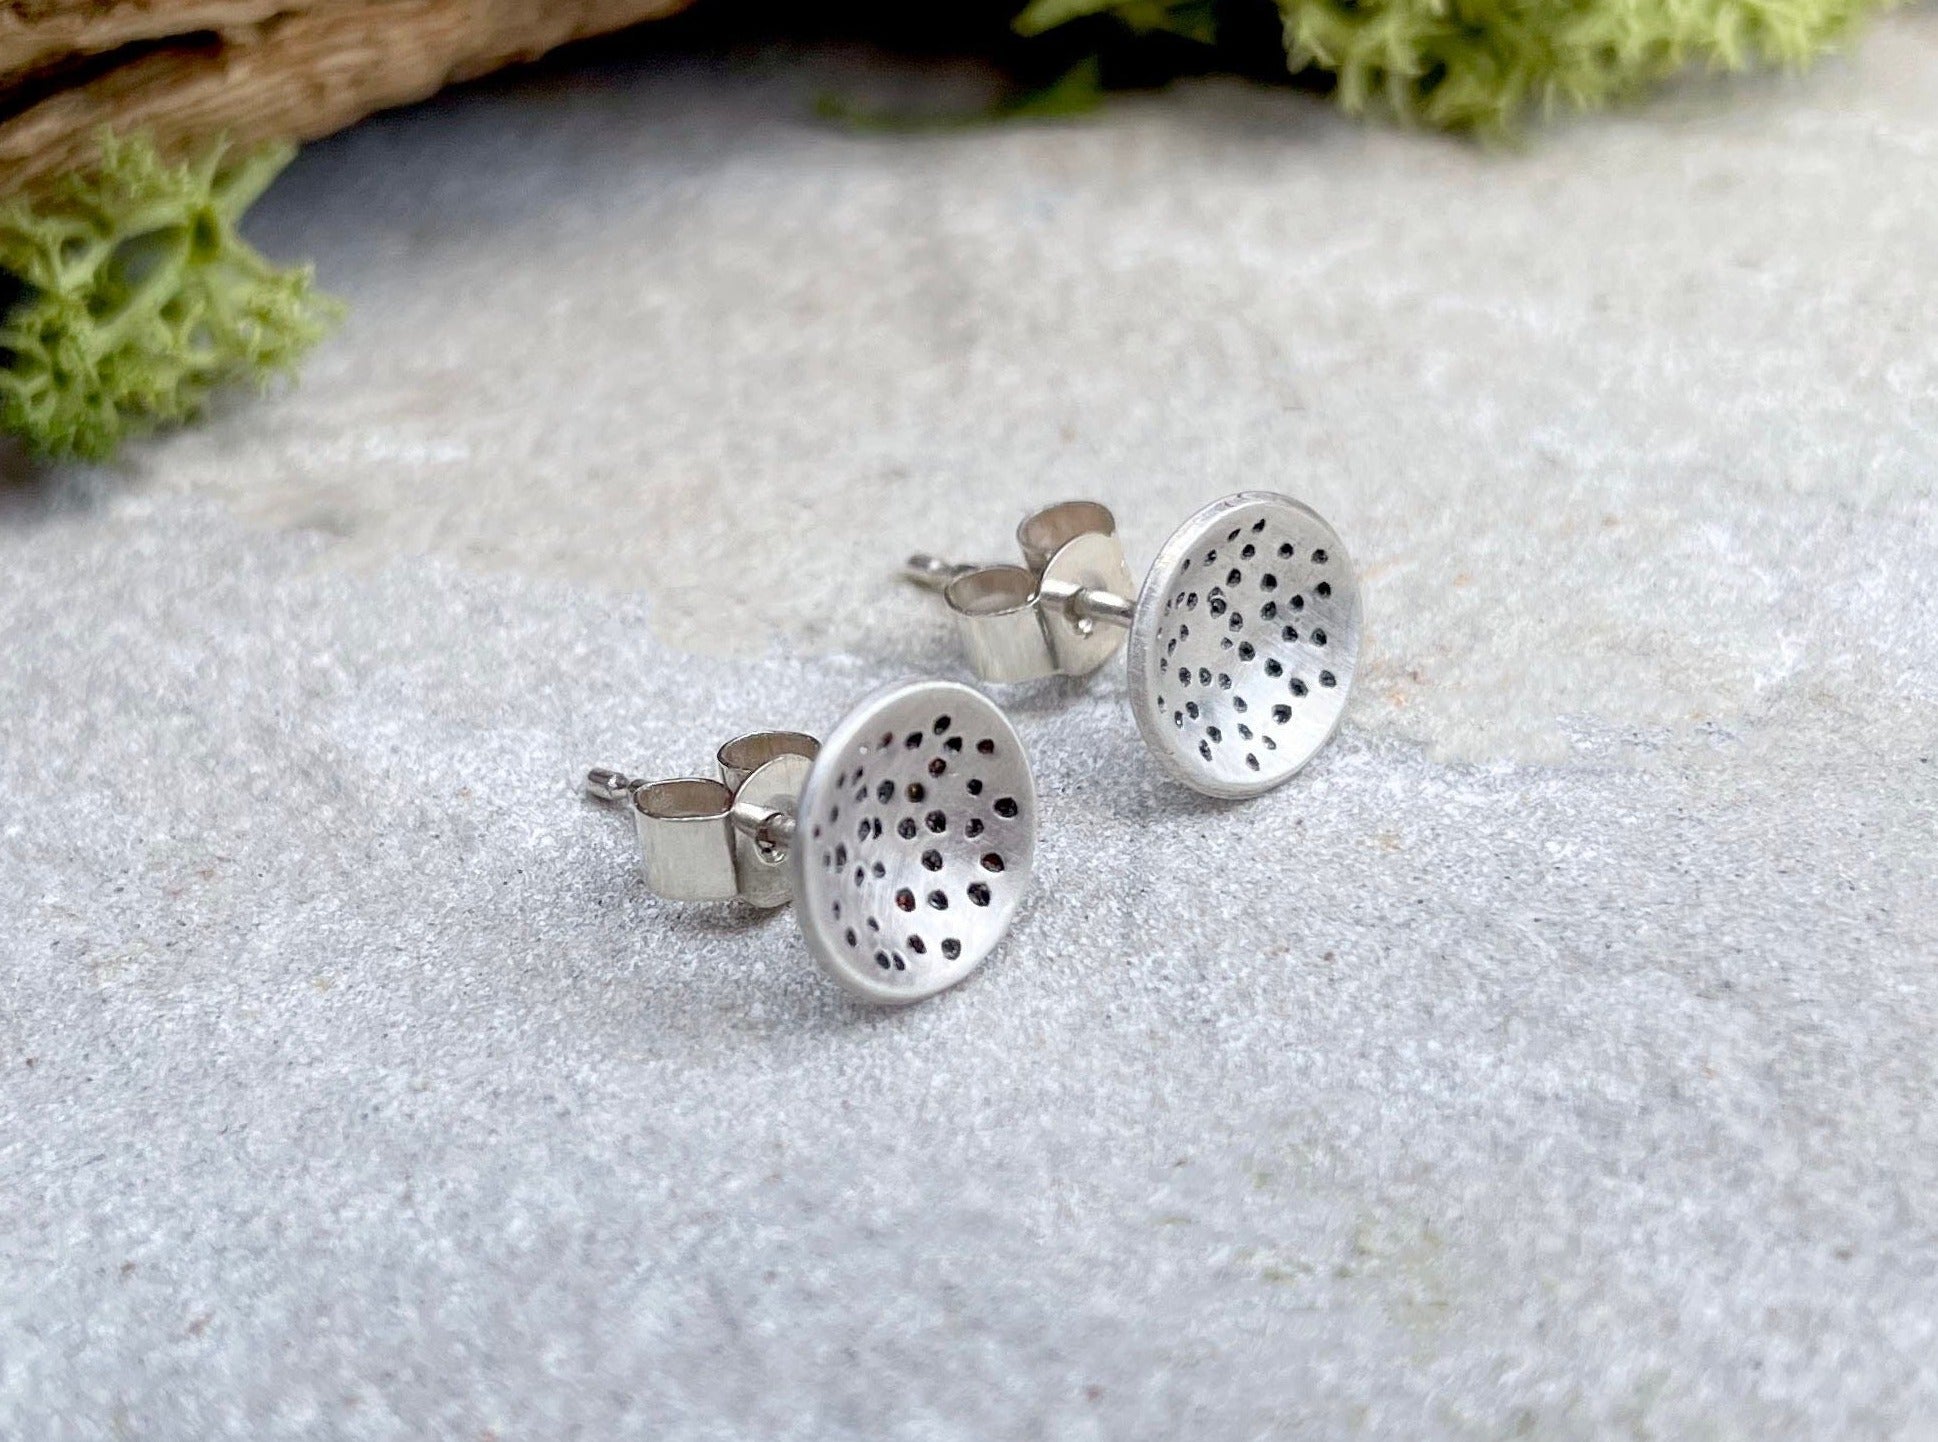 Silver Celestial Stud Earrings by Curious Magpie